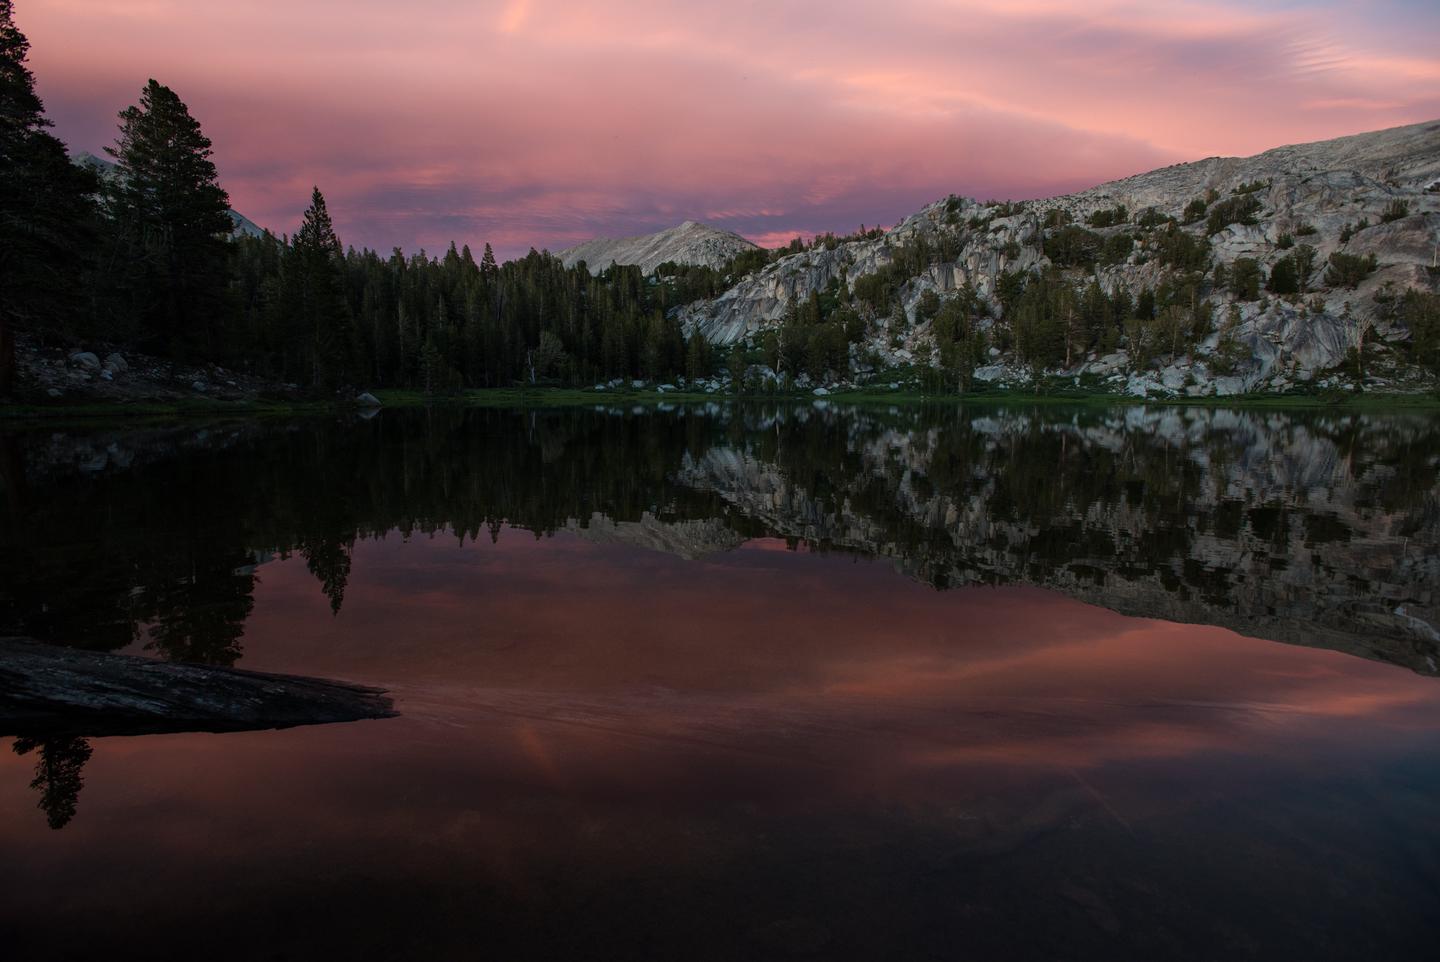 View of lake at sunset with clouds in the distanceThe last light of the day brings vibrant colors after a clearing storm. A calm High Sierra lake provides a perfect mirror for the fading light. 